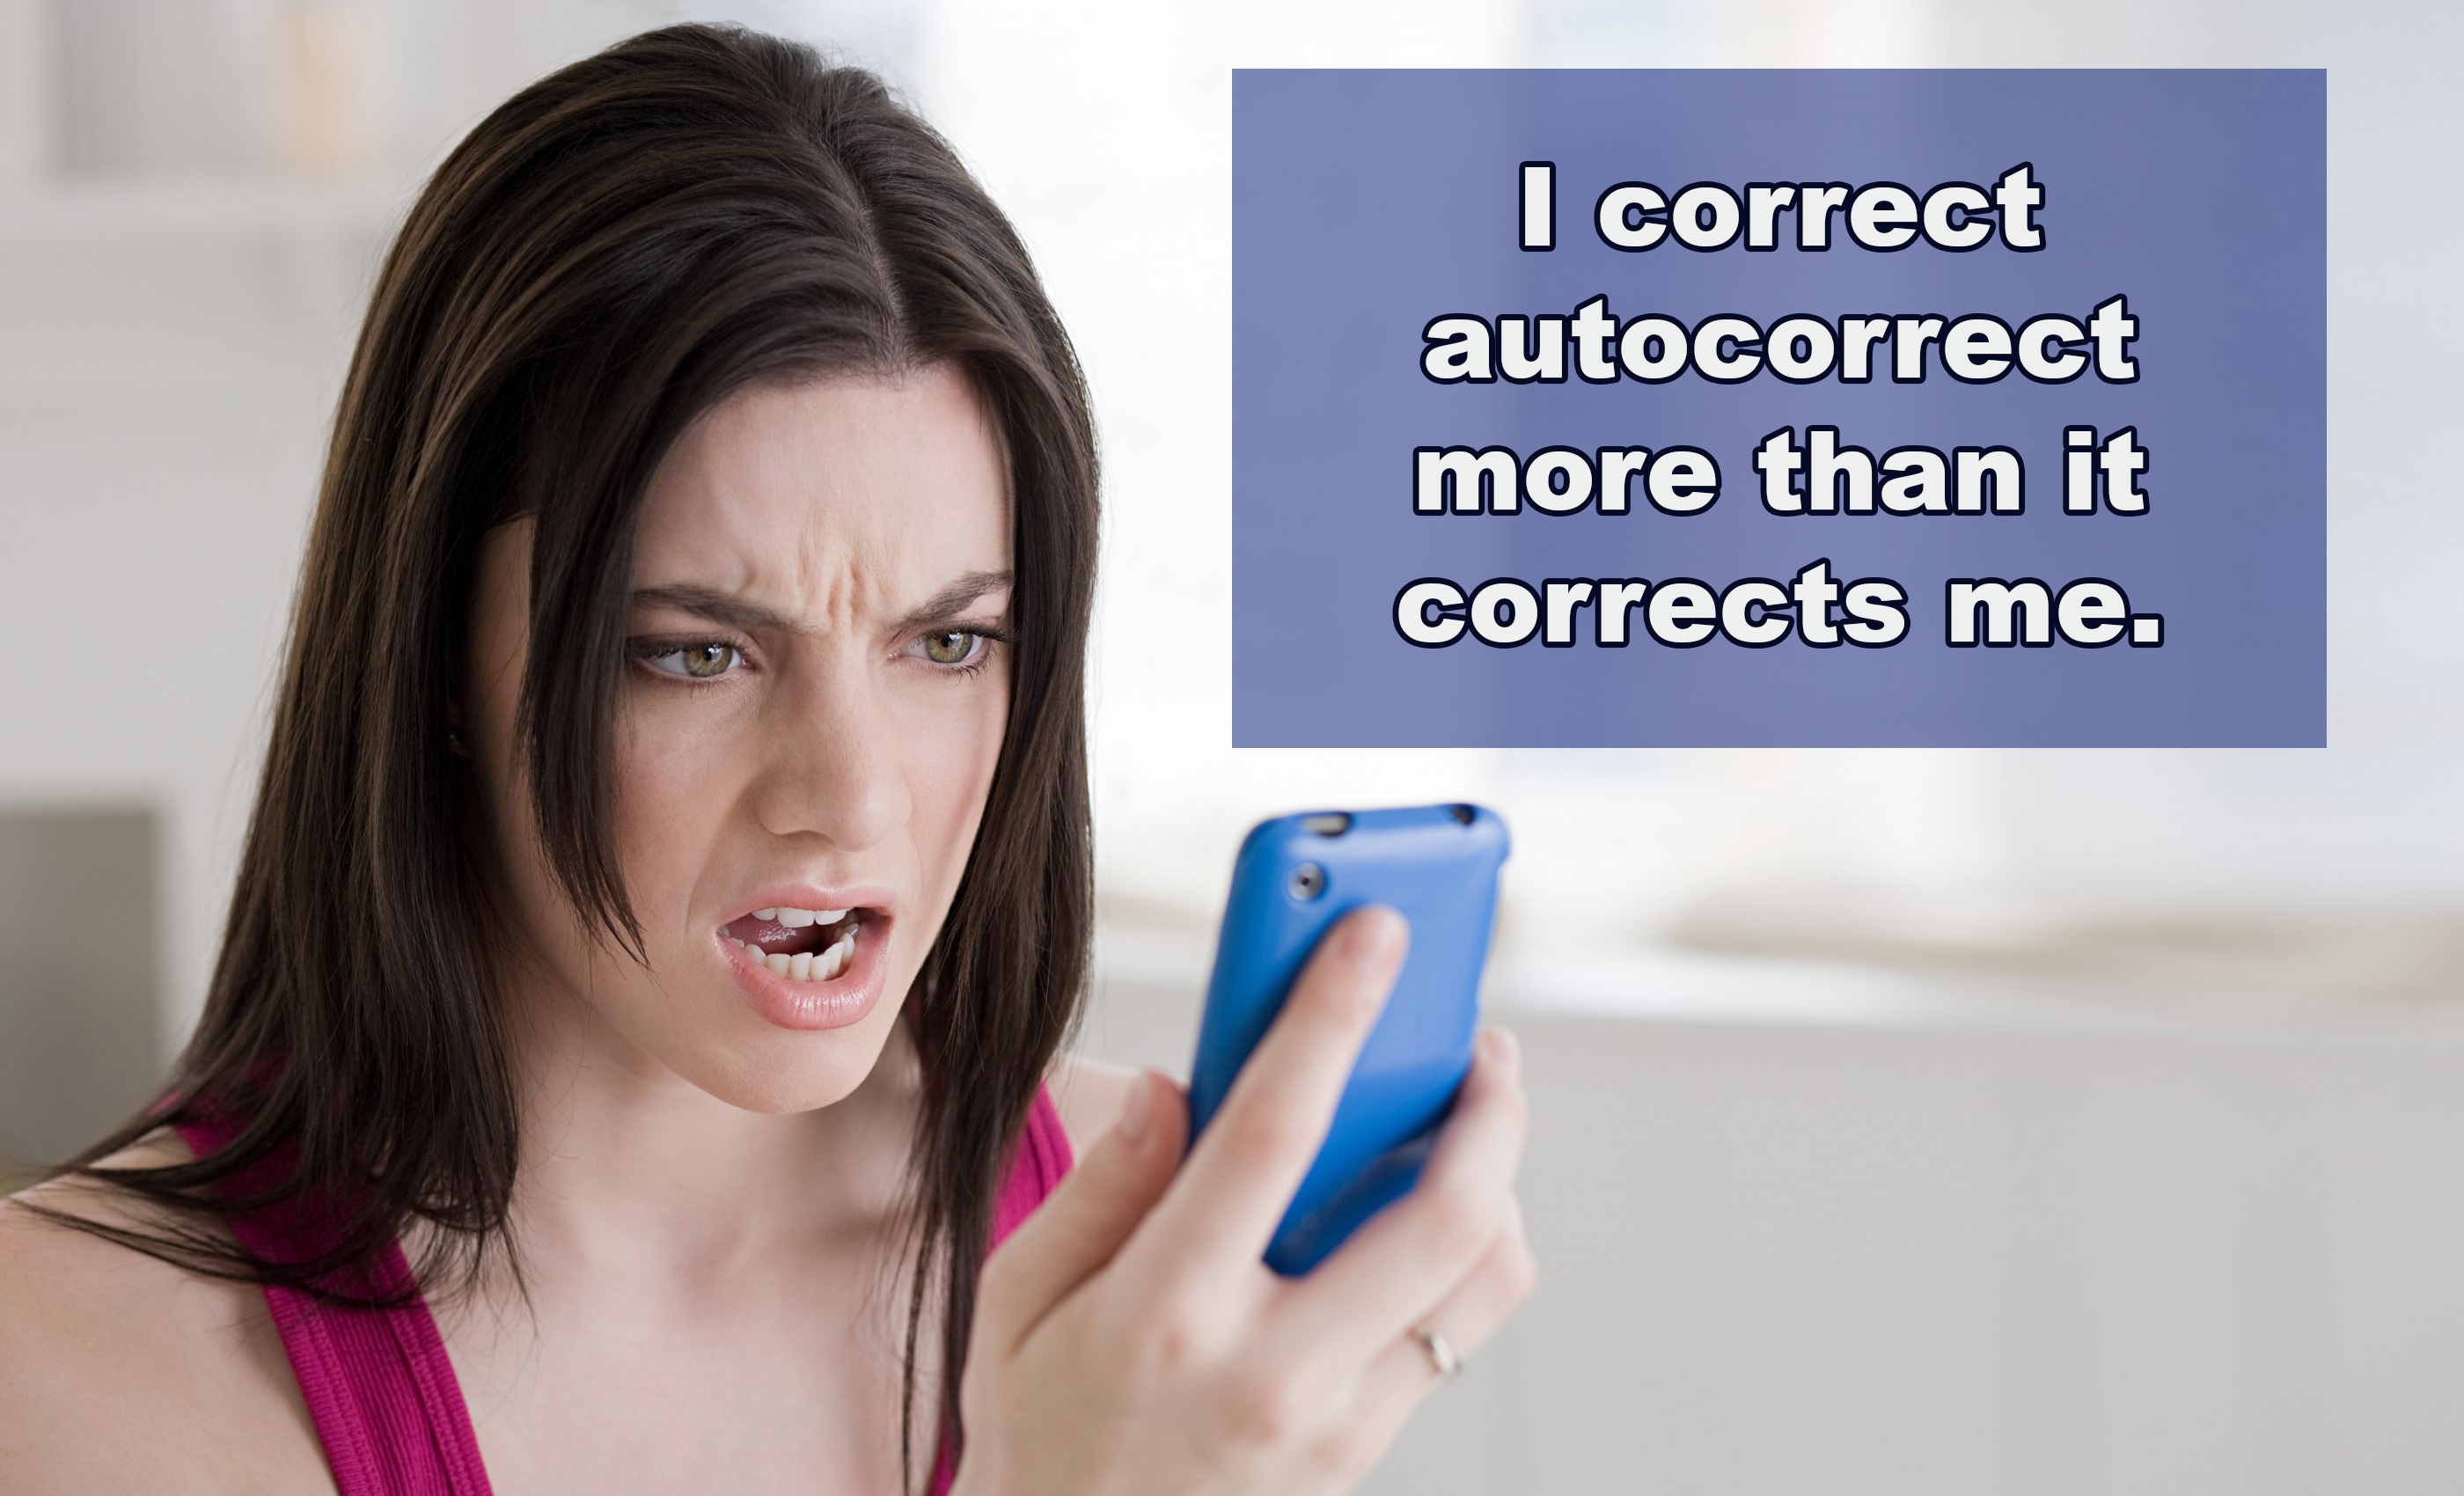 angry wife on phone - I correct autocorrect more than it corrects me.